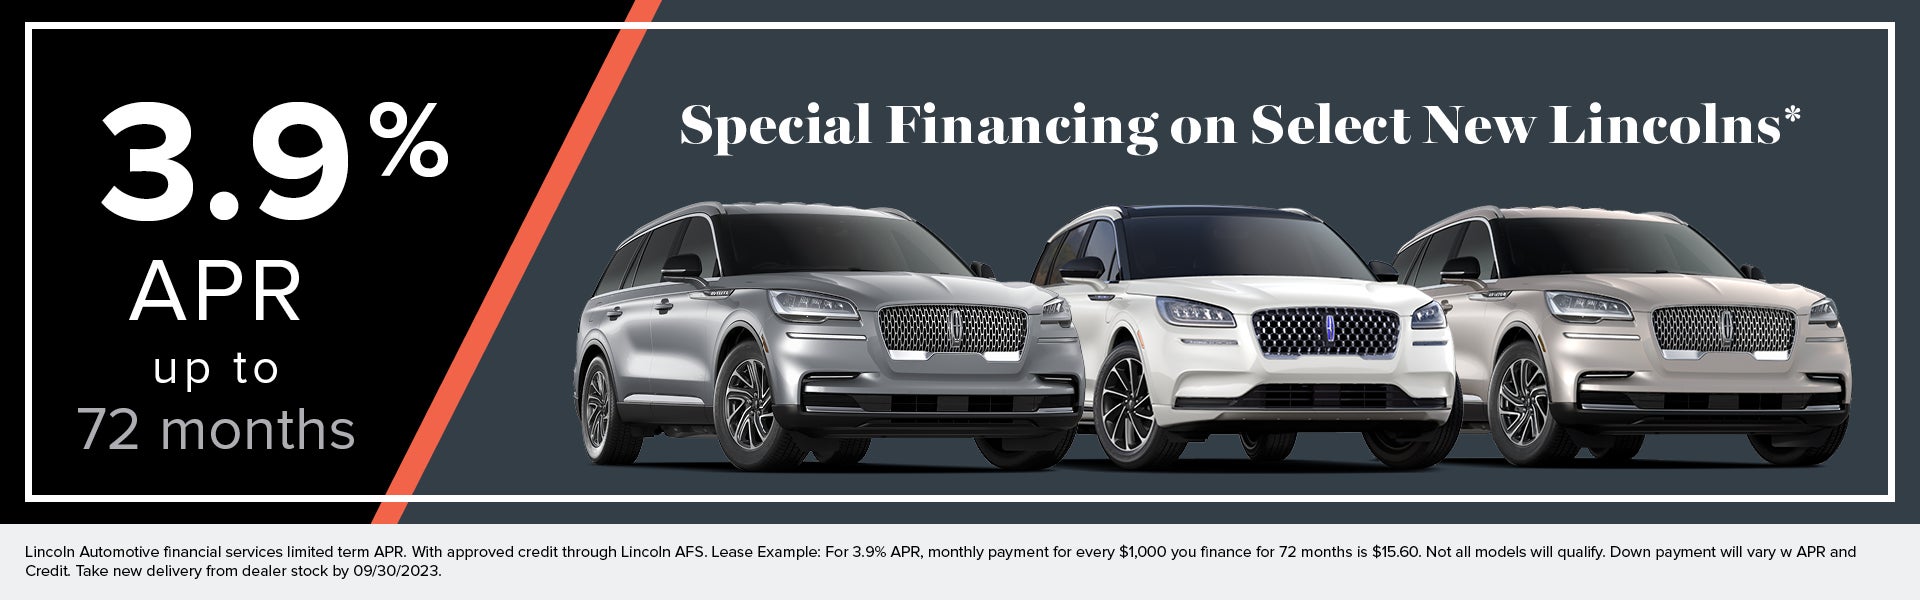 Special Financing on Select New Lincolns